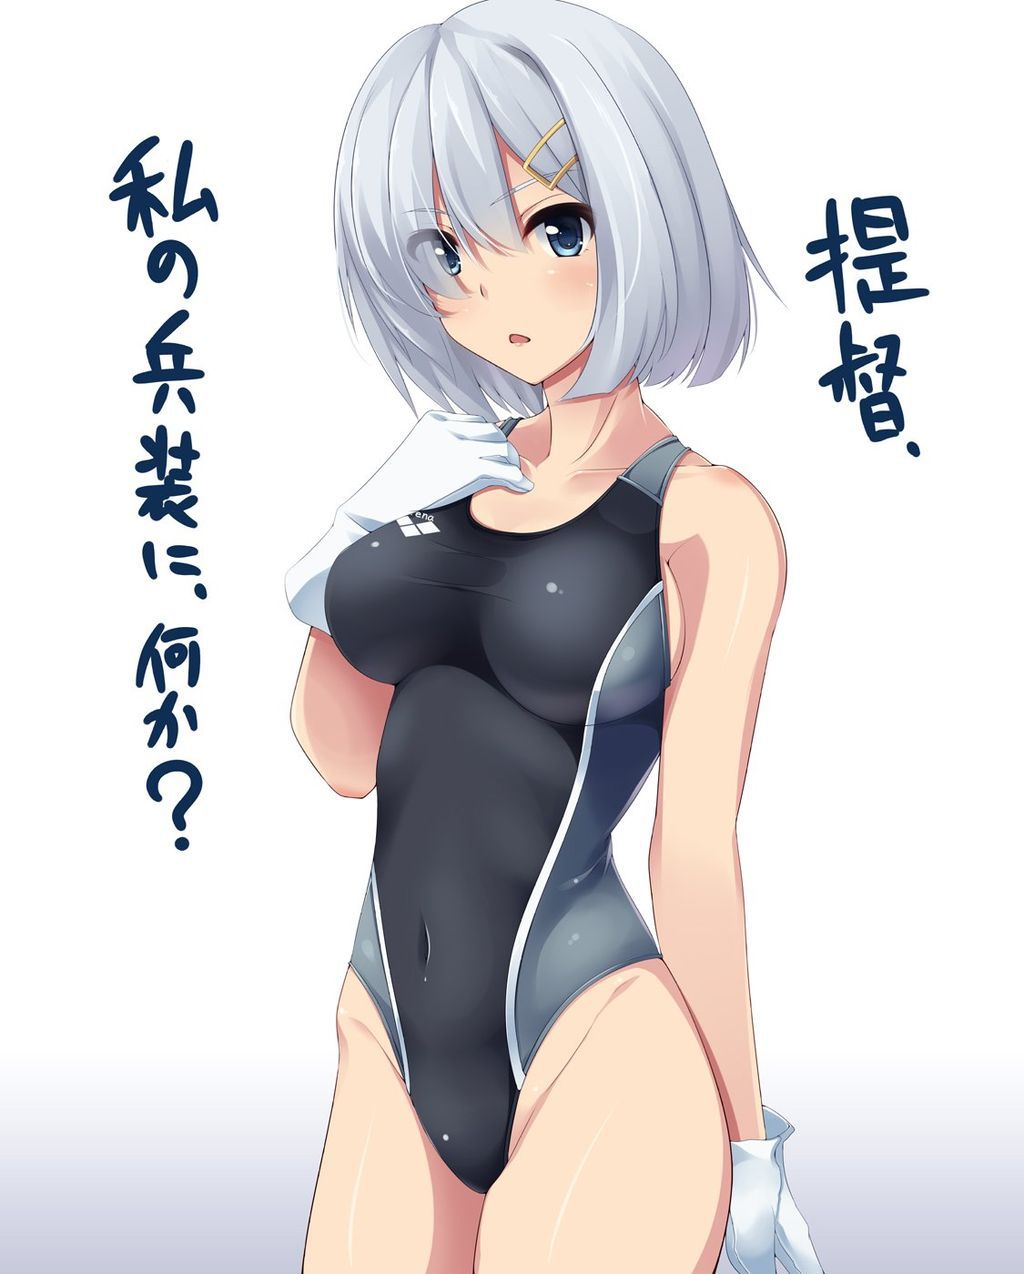 It comes more than a usual swimsuit! Second erotic image of the girl in the swimsuit wwww Part 5 34